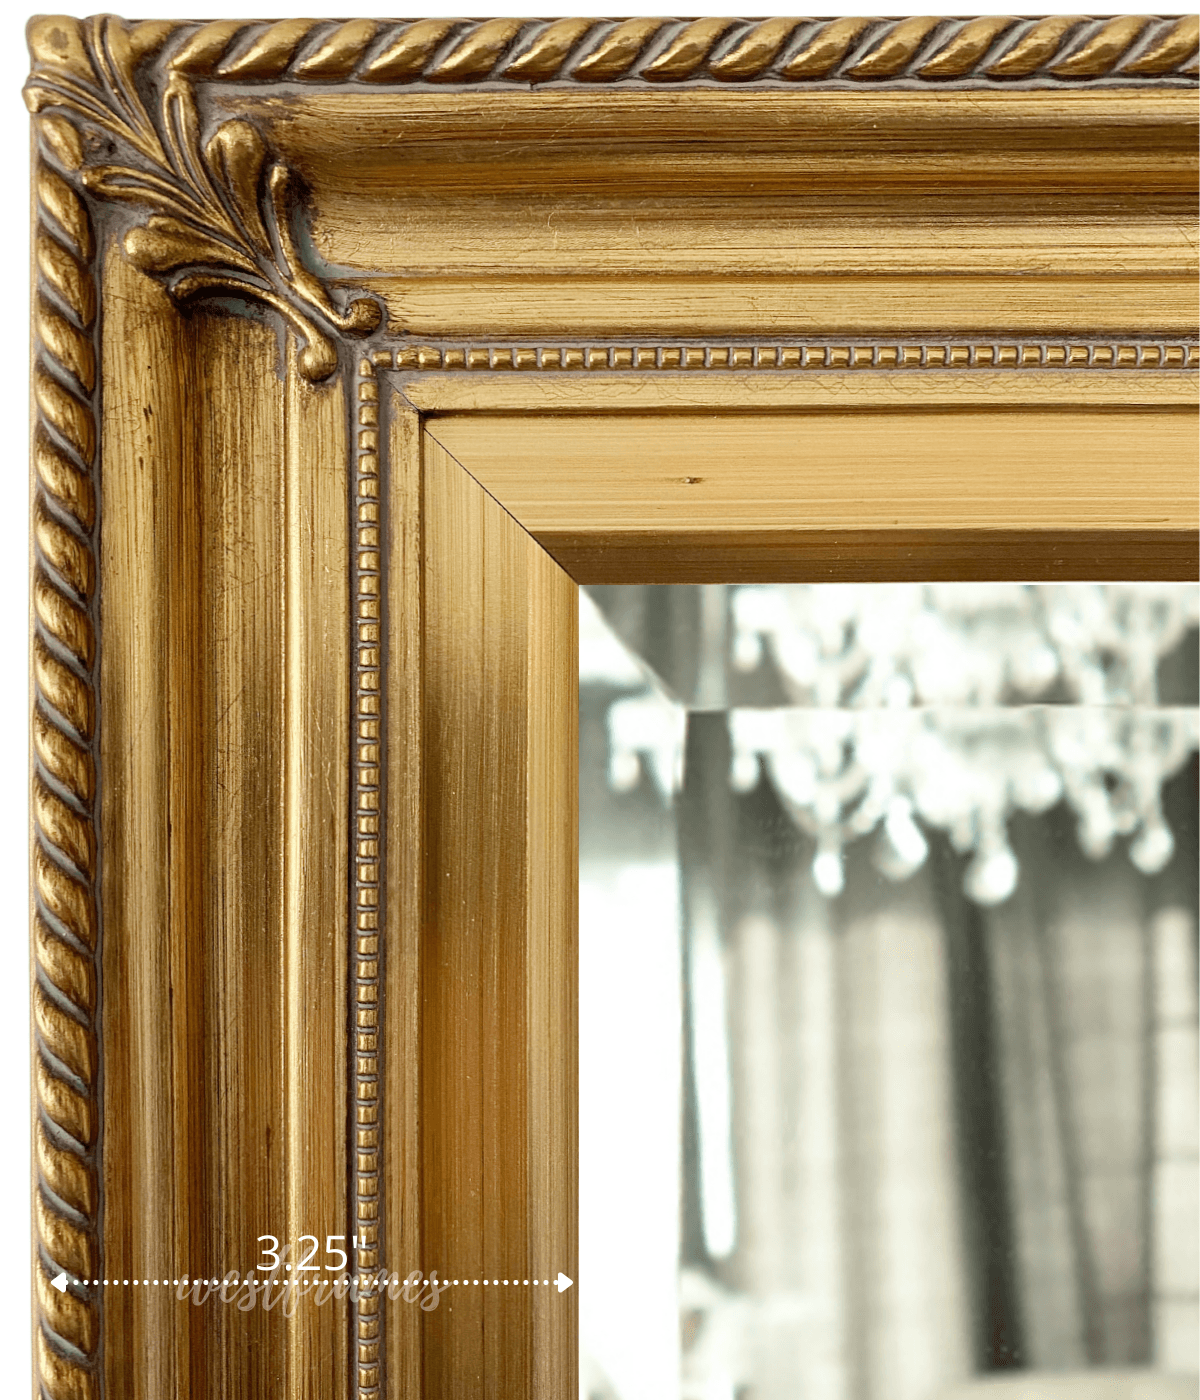 Accent Wood Frame 16x20 - Antique Gold